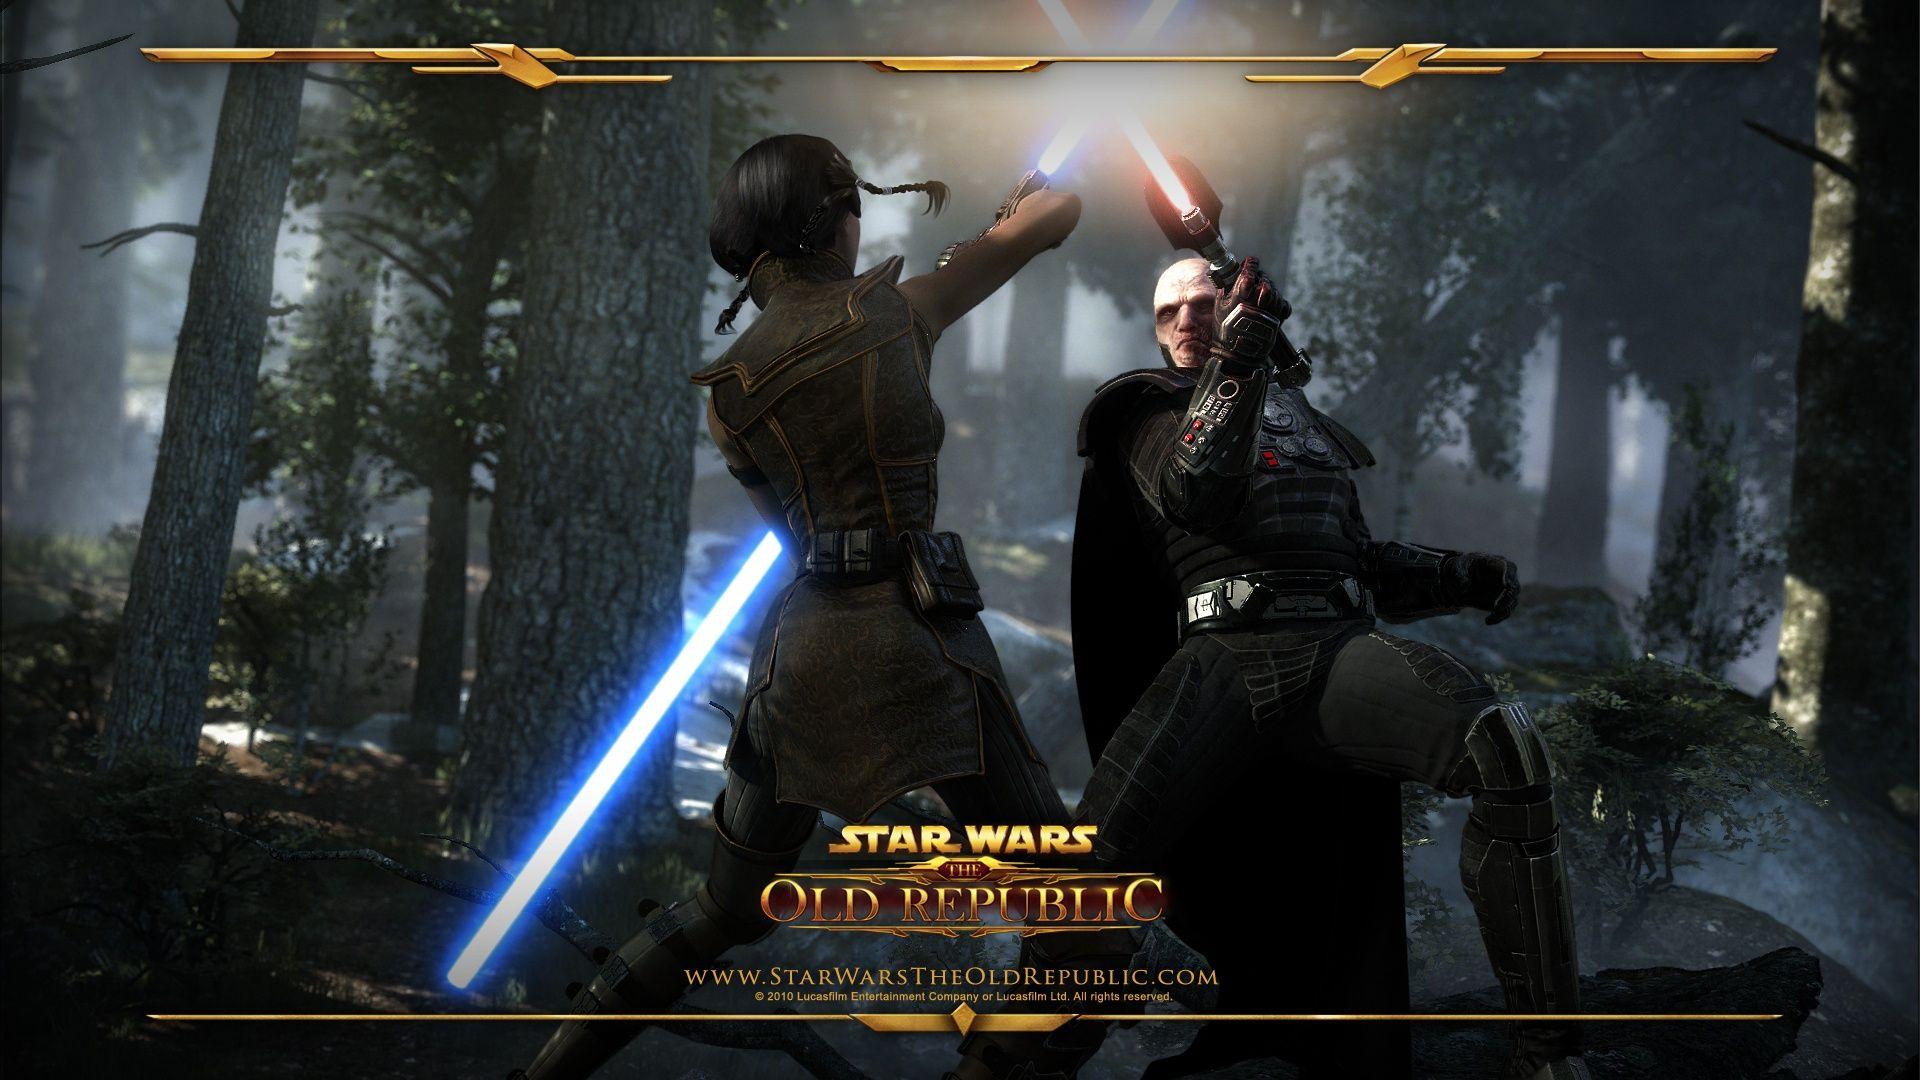 Desktop For Star Wars The Old Republic Wallpaper High Quality Mobile